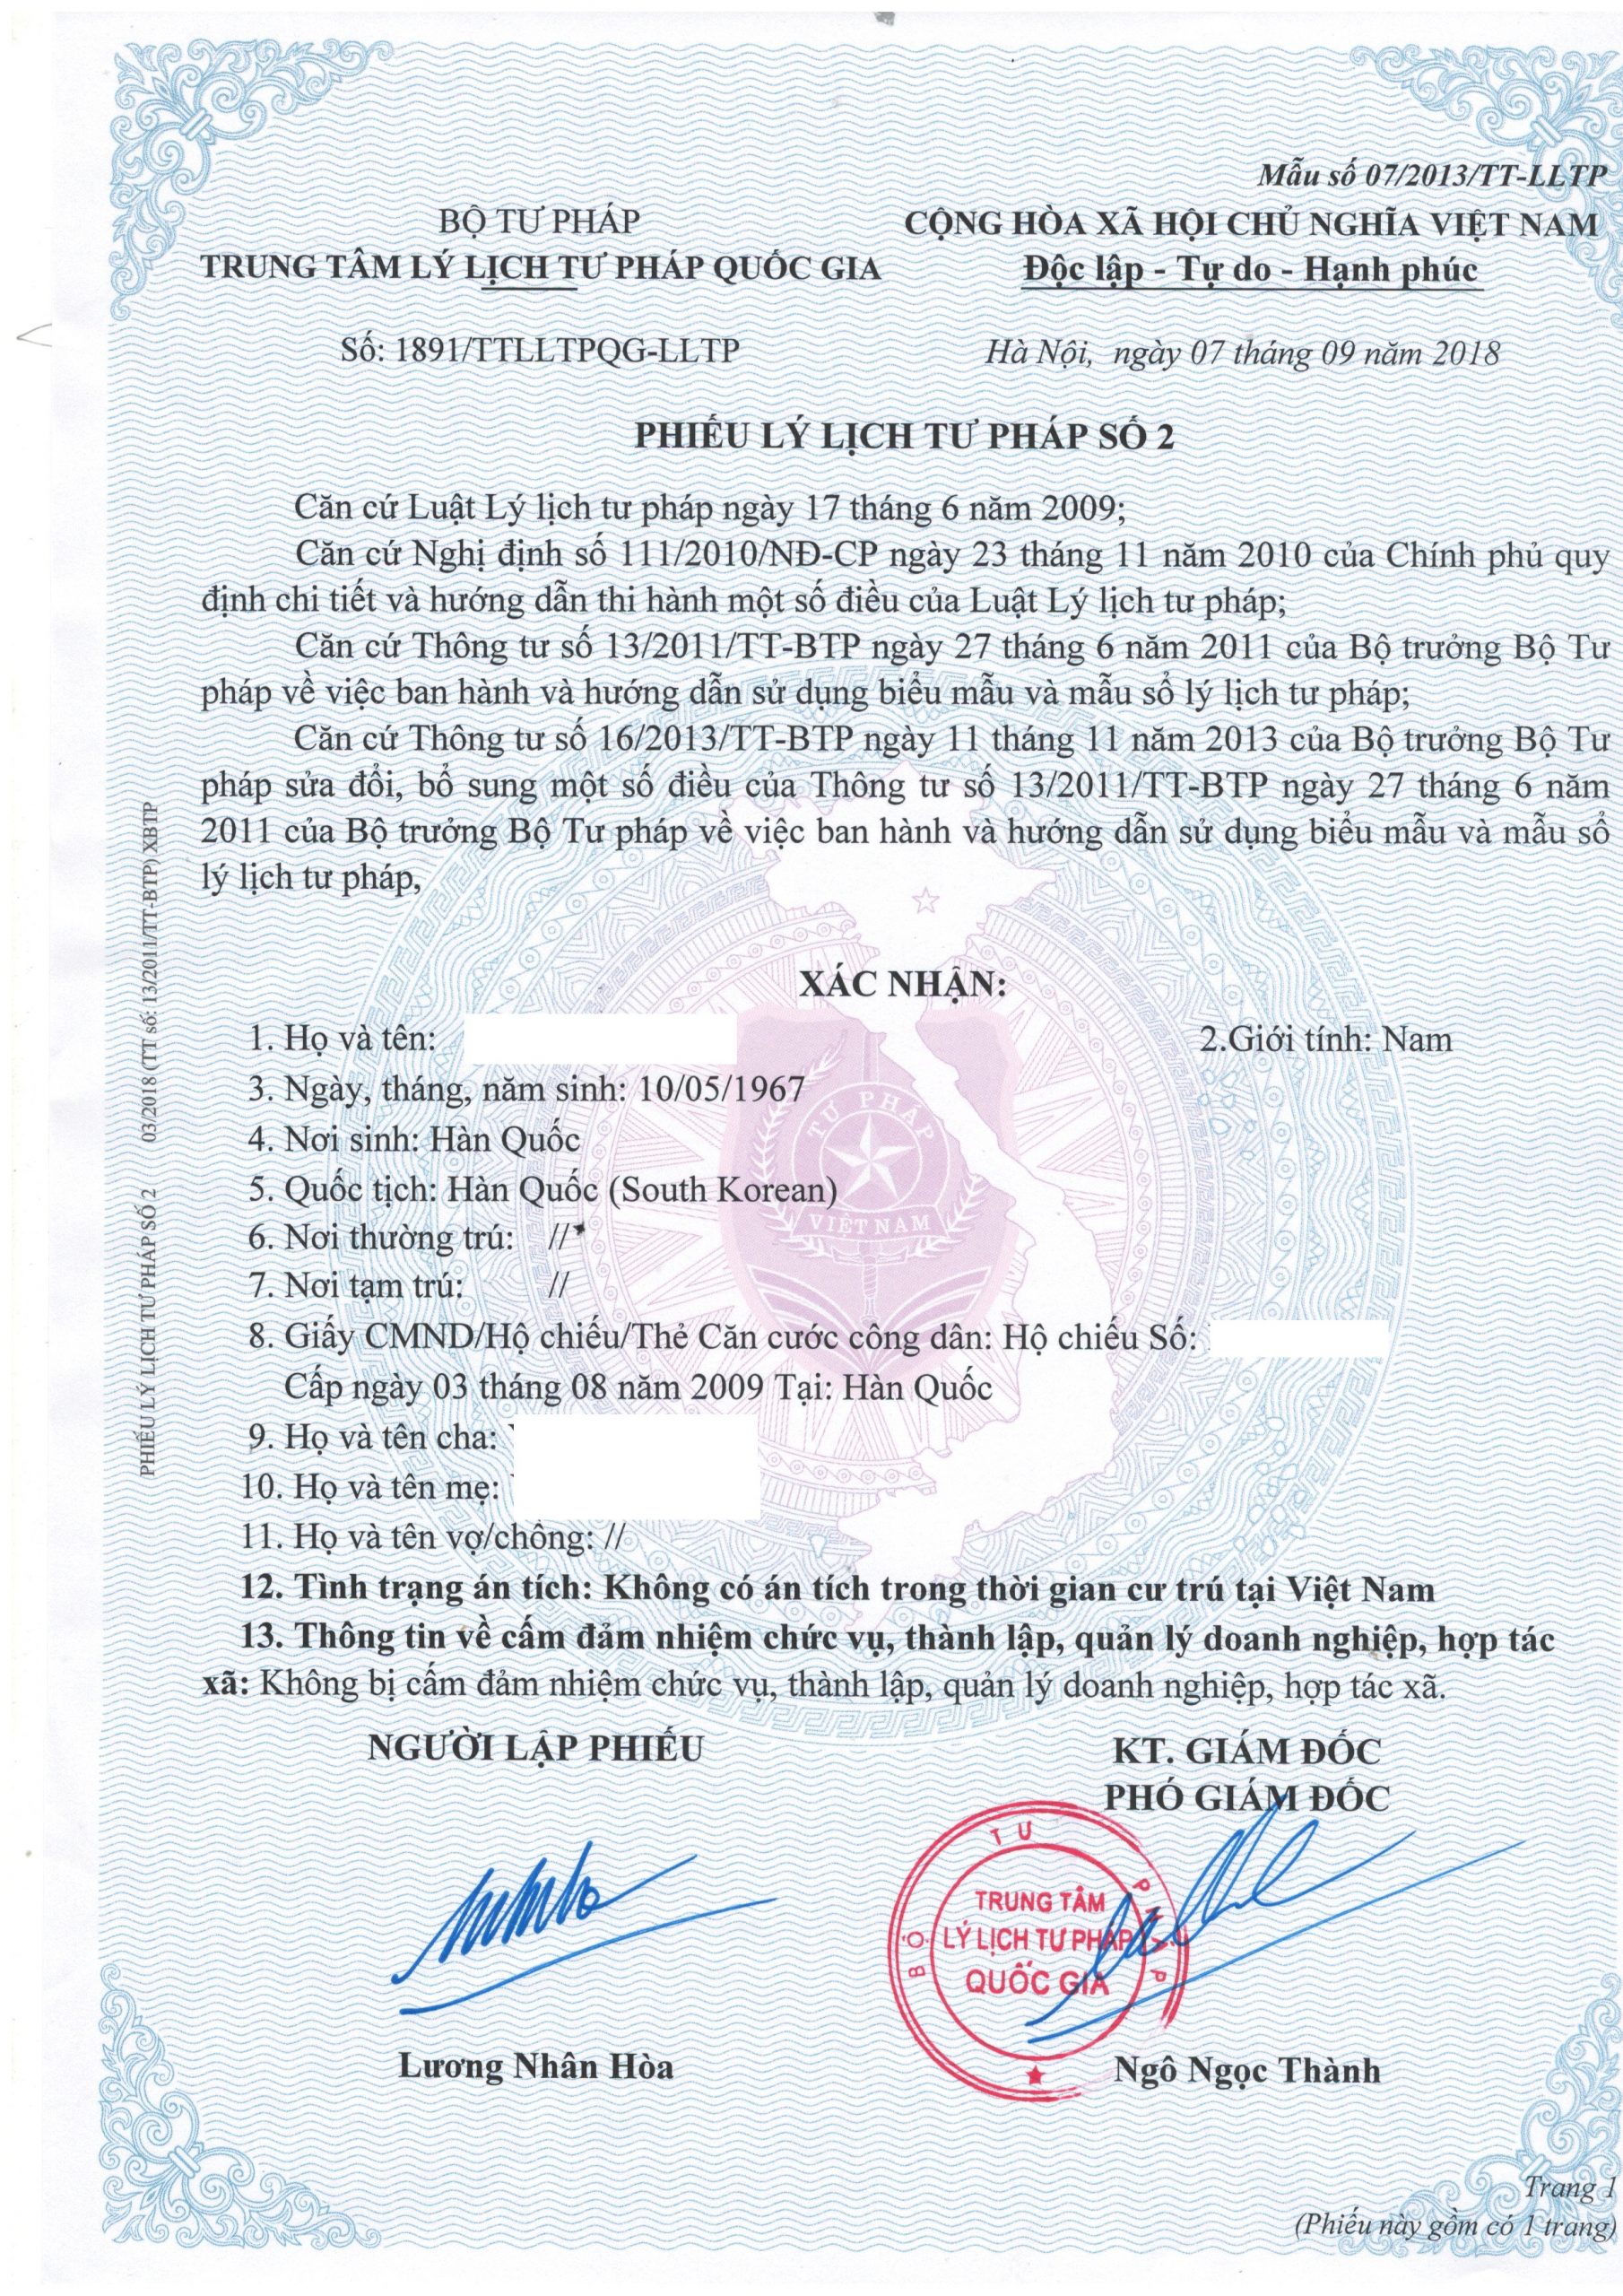 Vietnam Police Certificates for Applying Permanent Resident of Canada – How to Get Vietnam Police Certificates No.2?